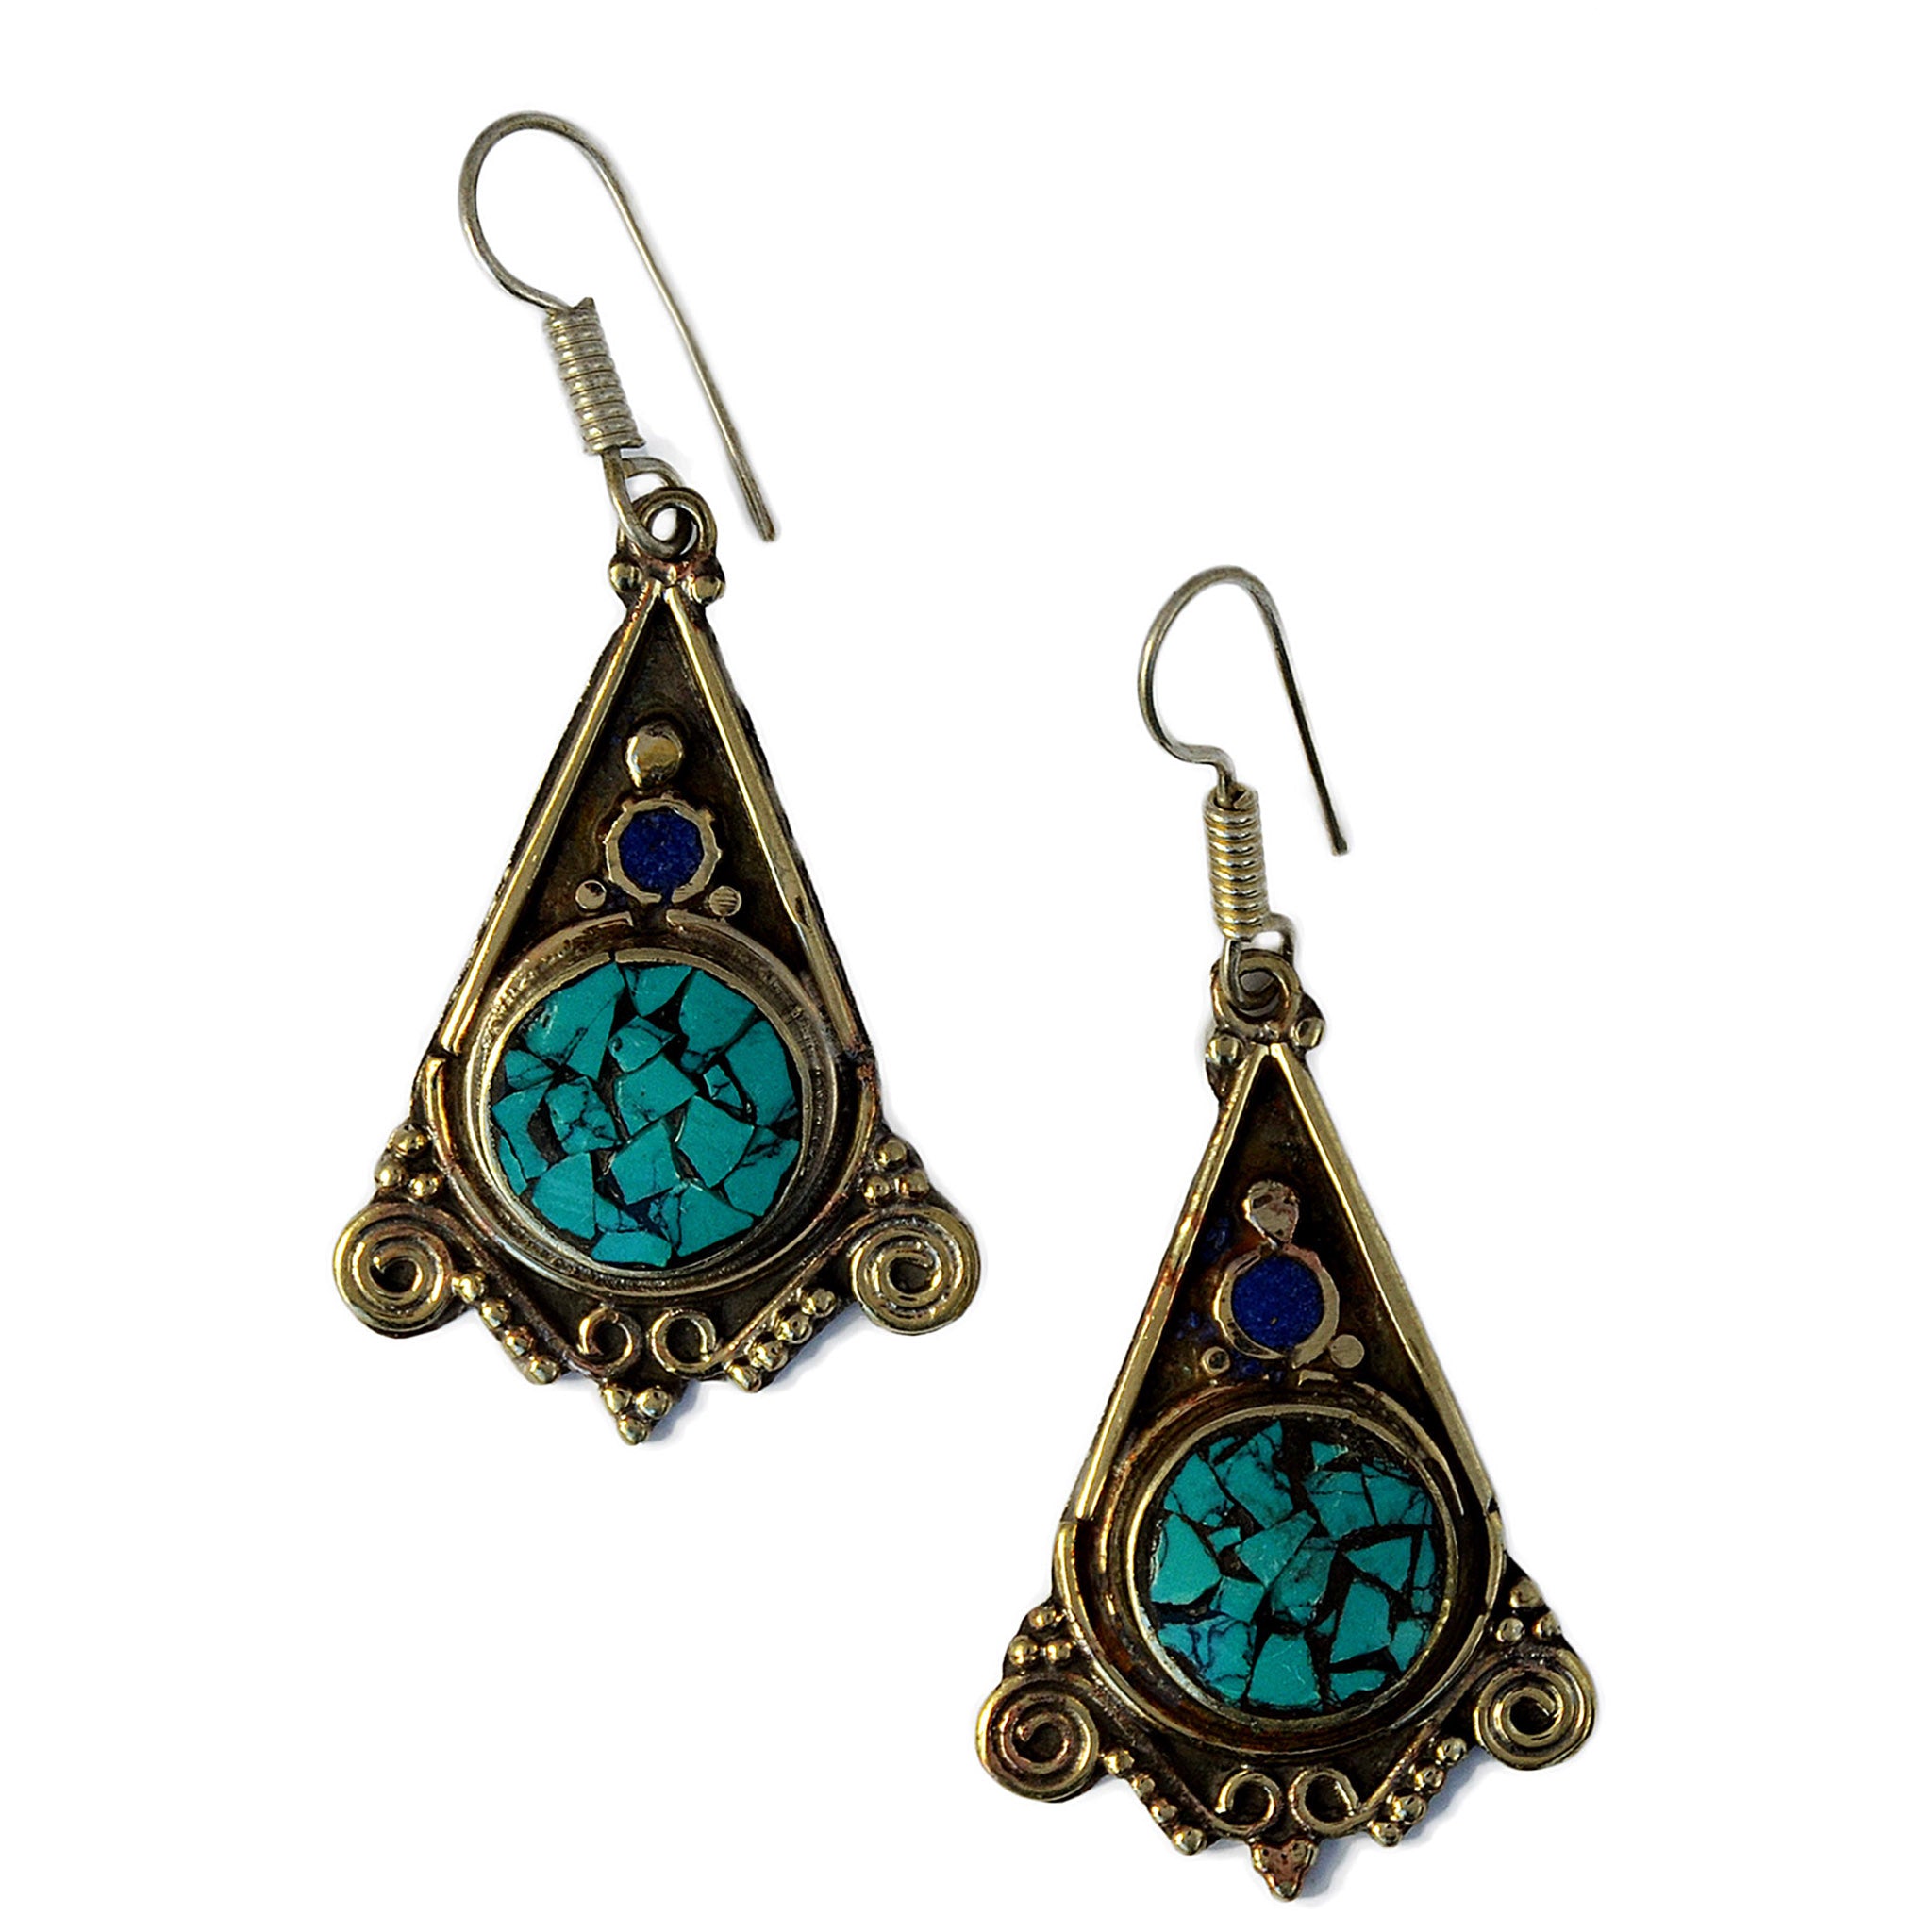 Traditional nepal silver dangle earrings with inlay turquoise and lapis lazuli stones